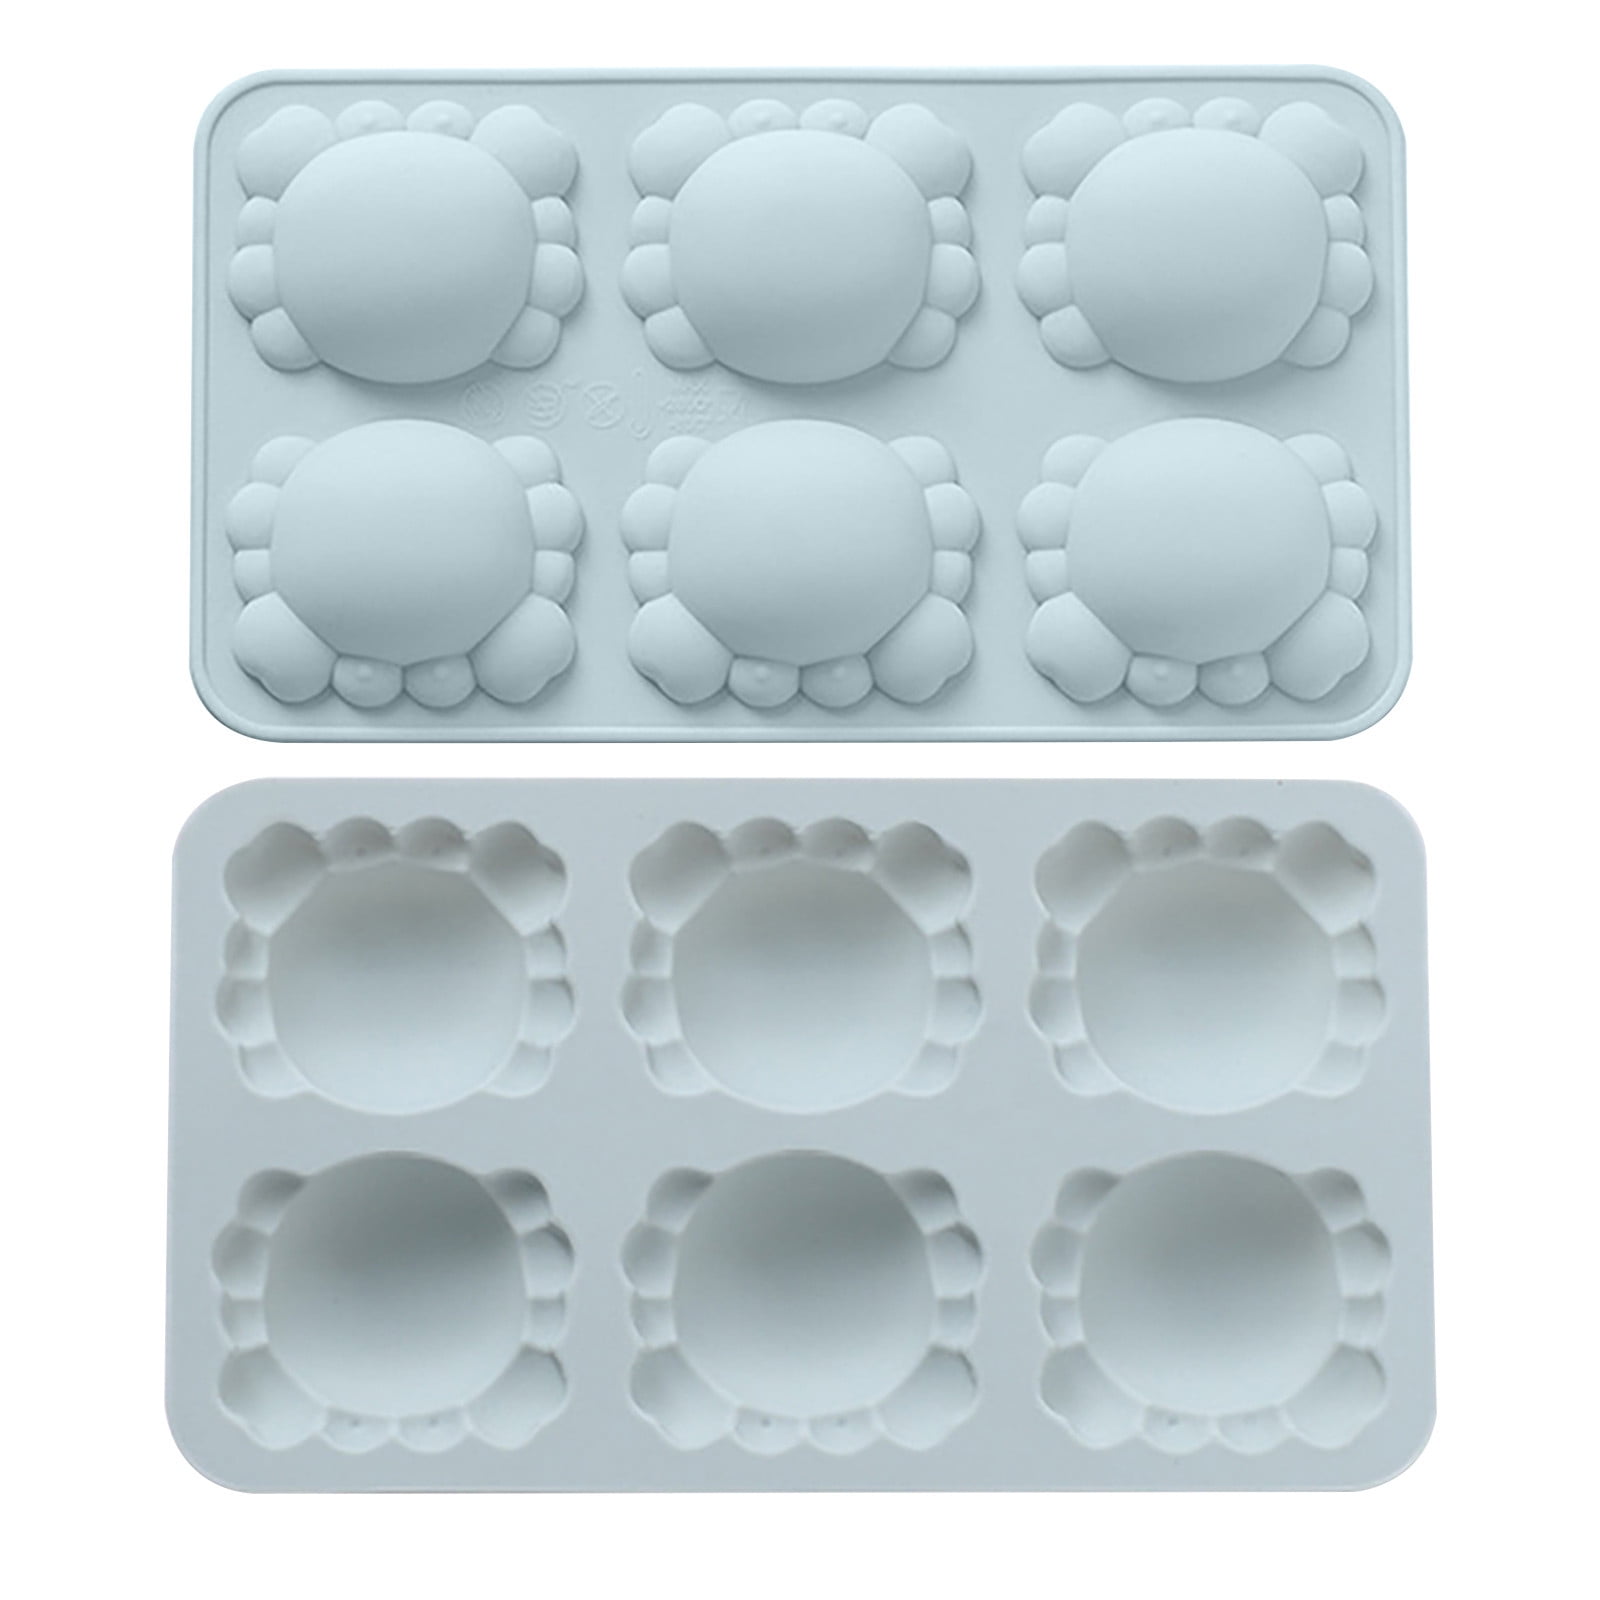 Details about   Silicone Cake Mould Muffin Chocolate Mold Baking Cup Cookie G0L0 non-stick M4G7 